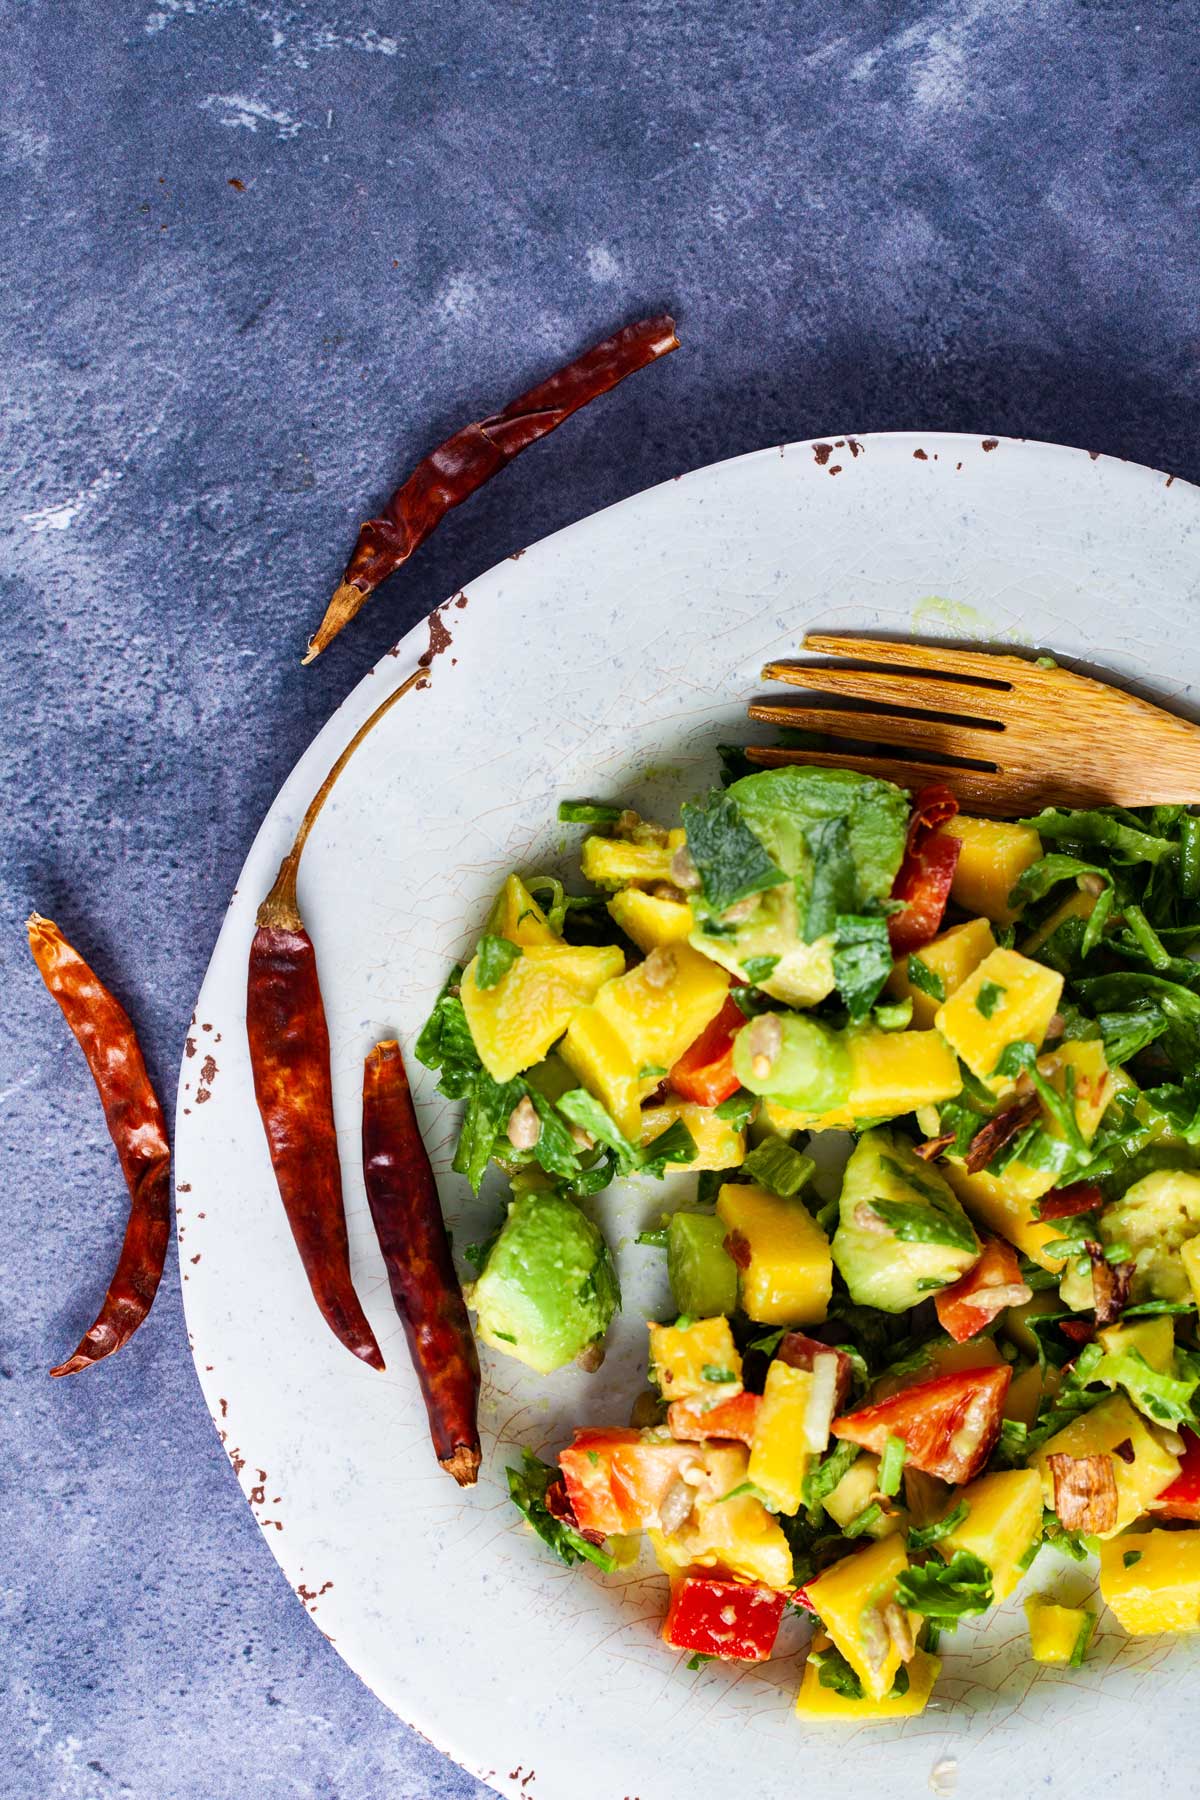 Mango avocado salad displayed on a plate with a wooden fork and dried red peppers on the side.